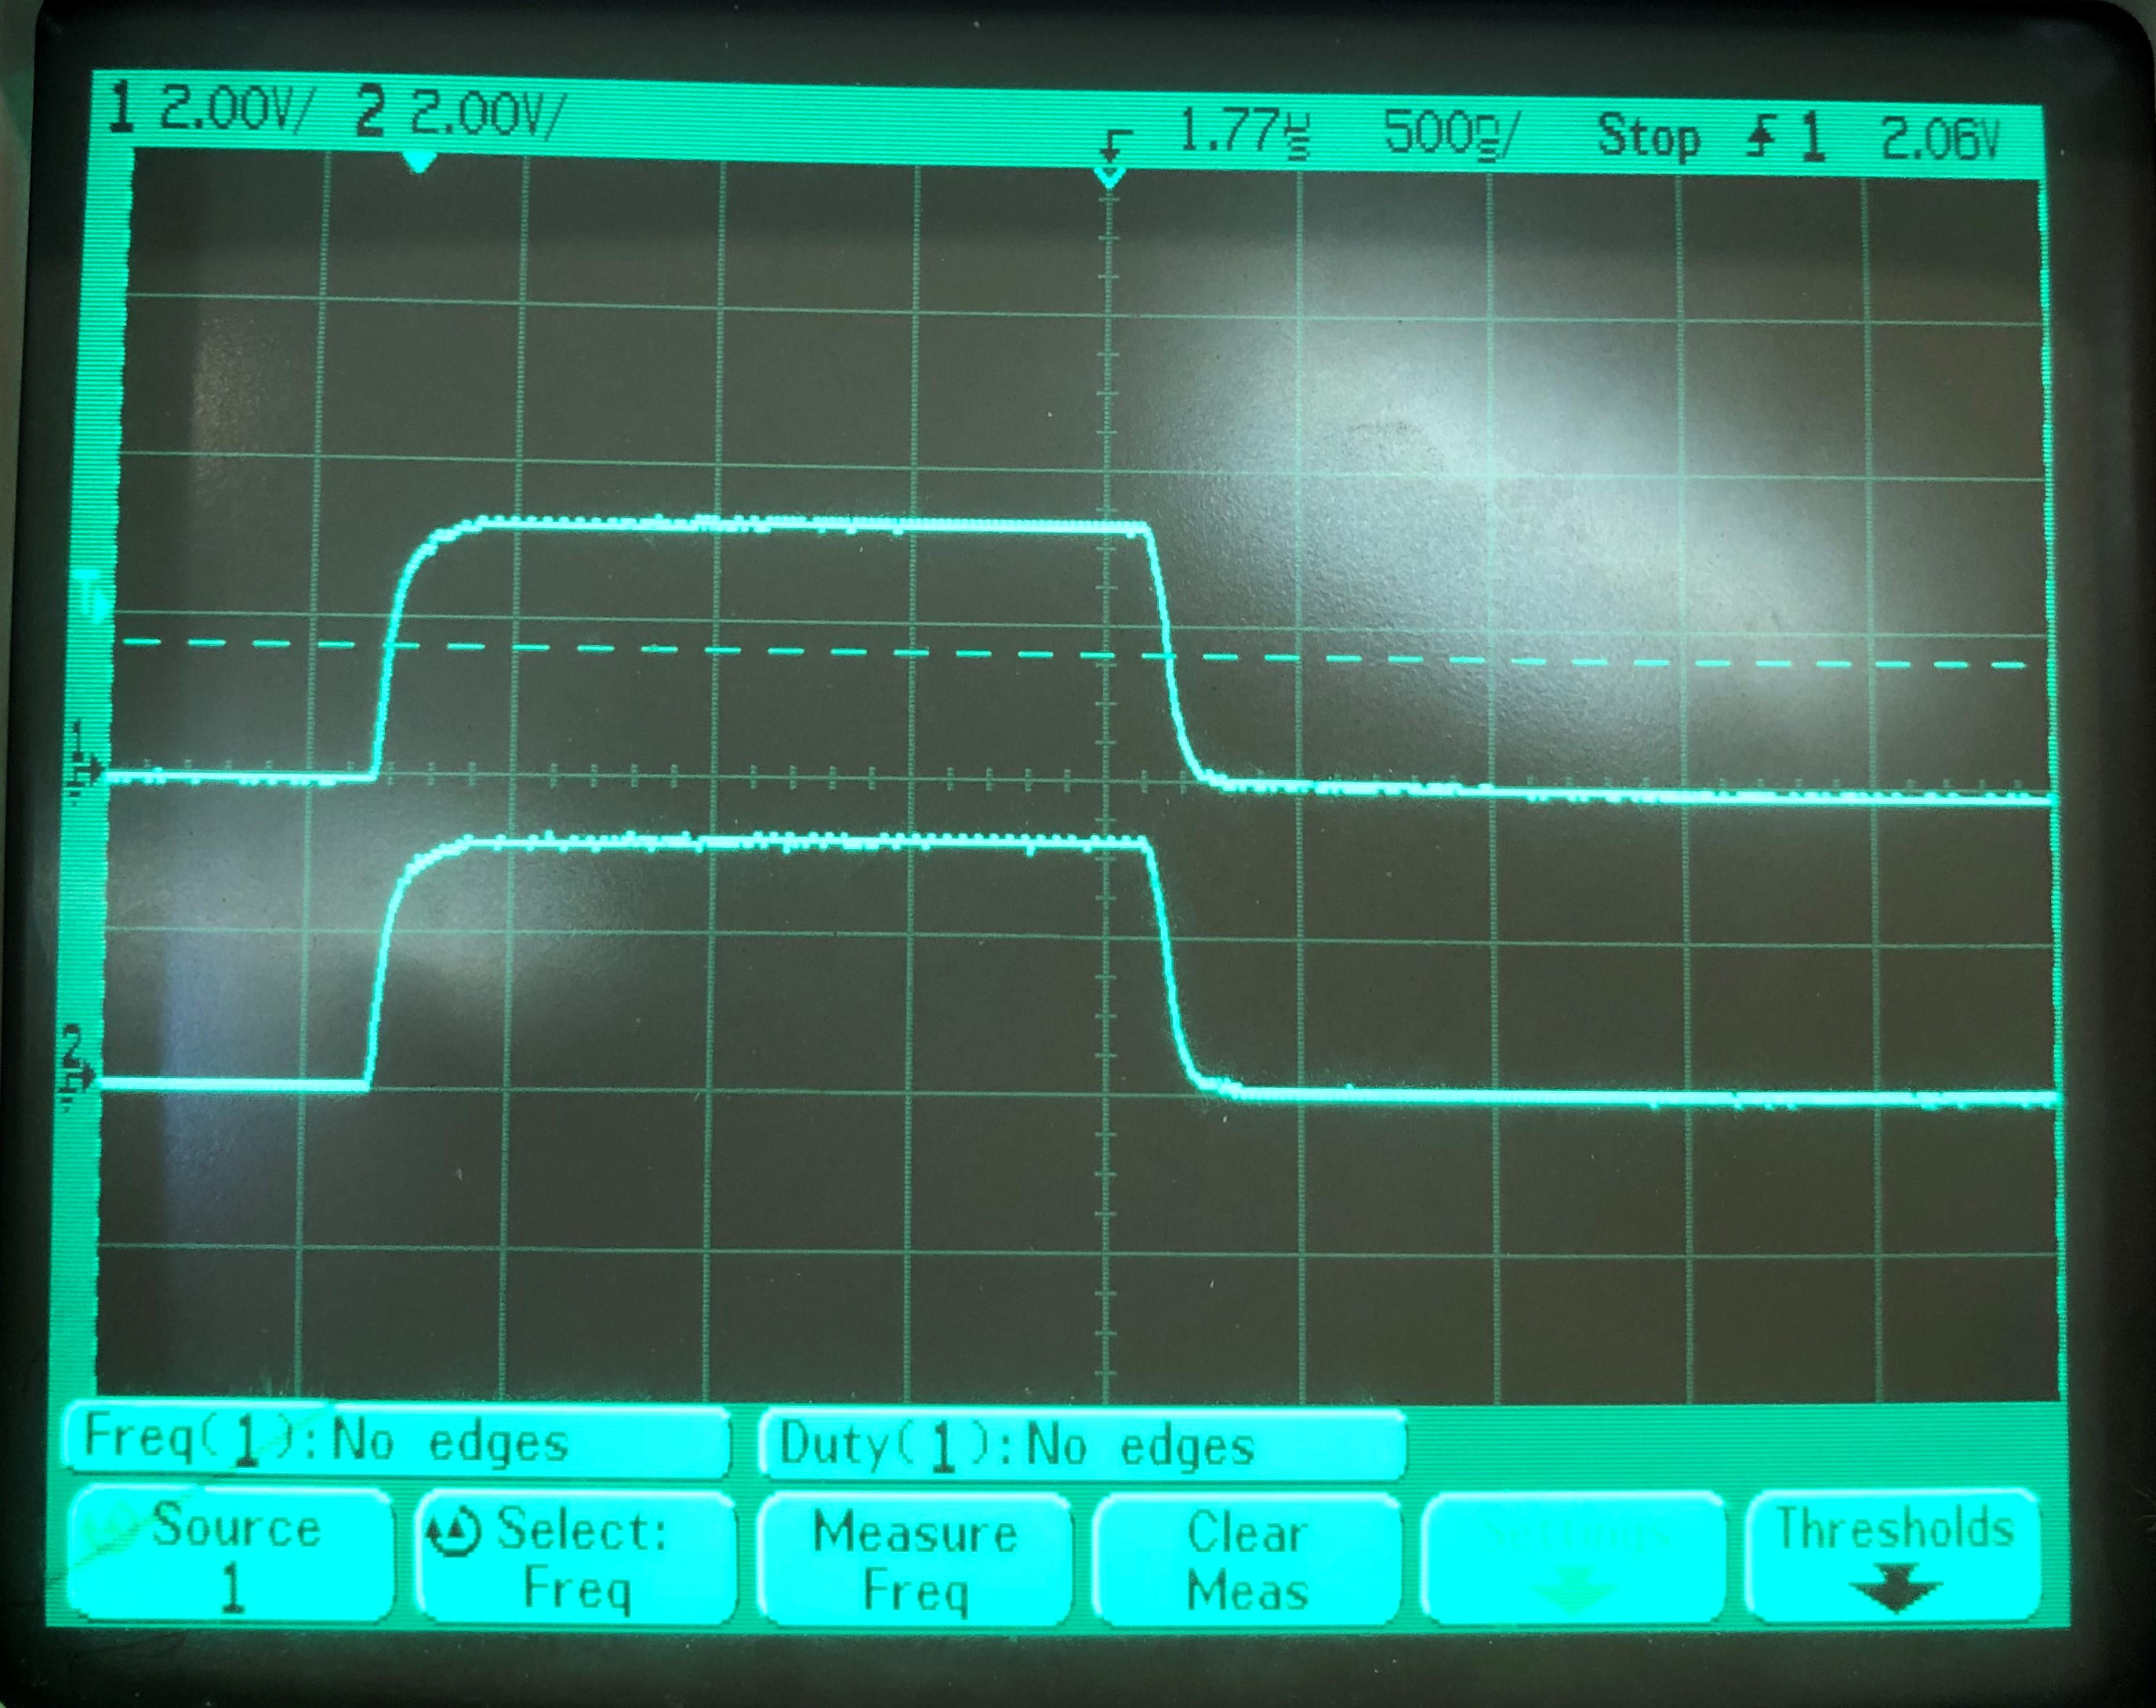 PWM traces on the gate and PWM pin after added the capacitor - Note a smooth falling edge with no undershoot